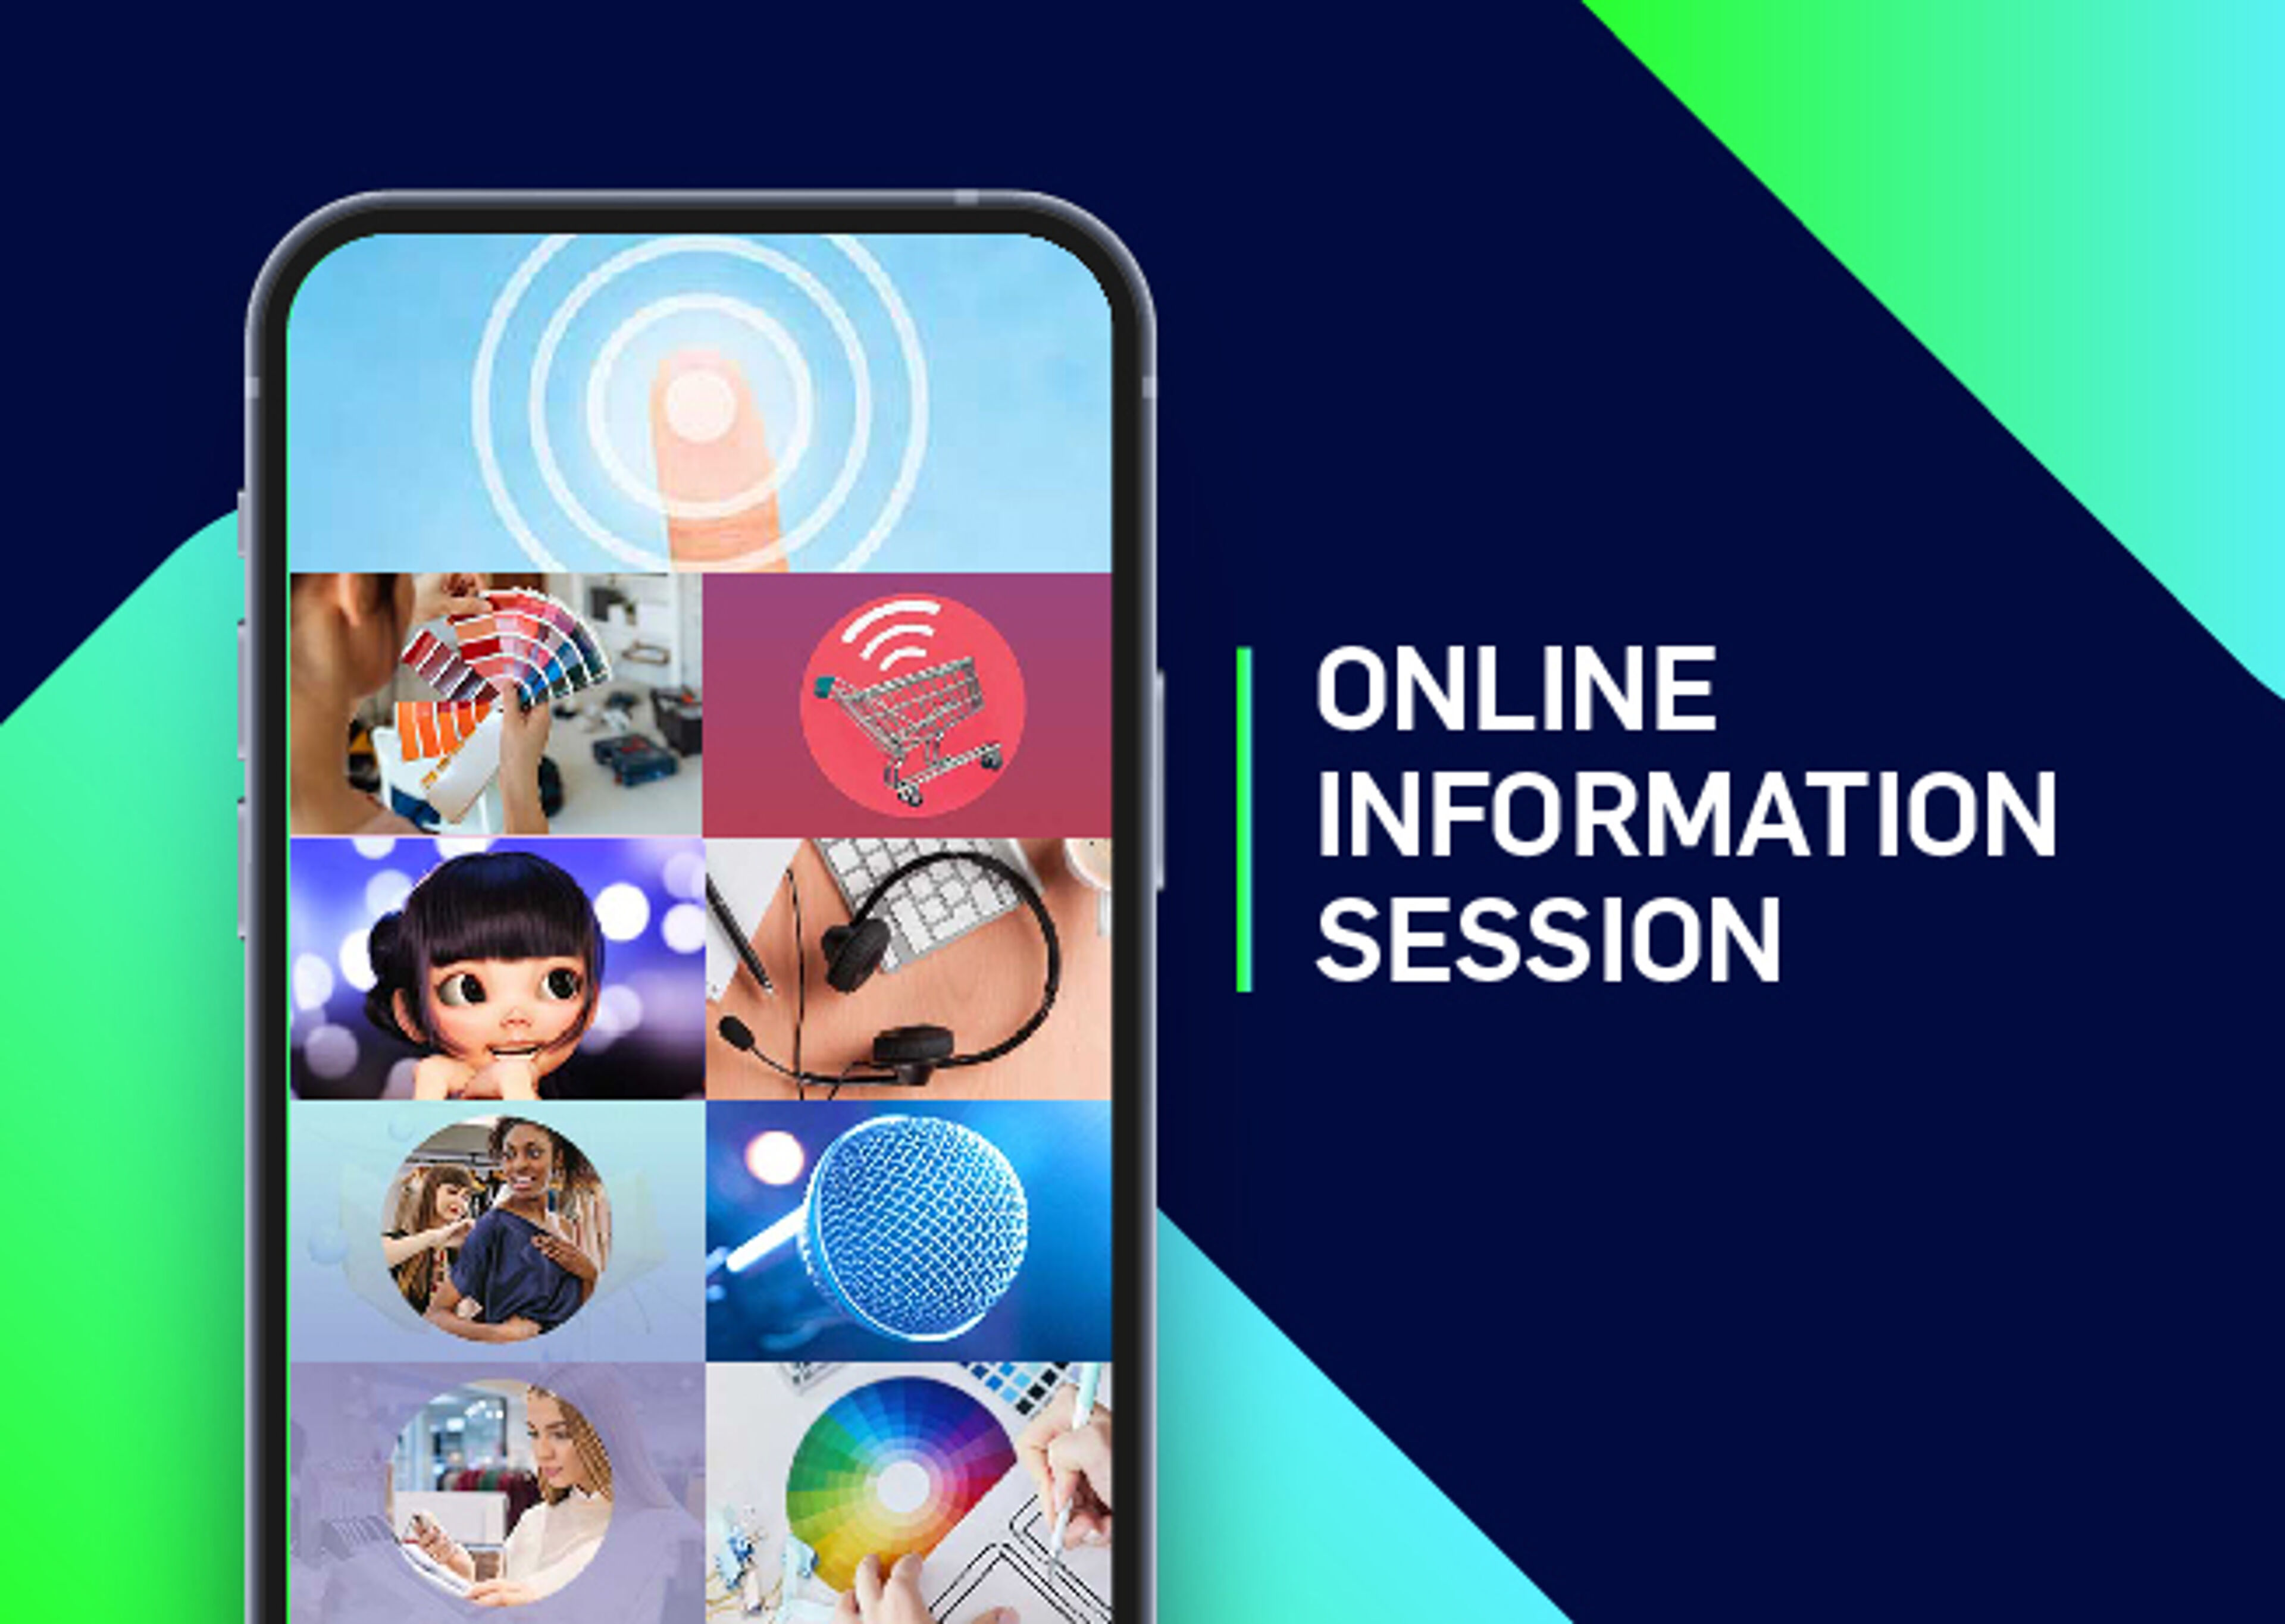 Promotional image for an online information session, showcasing diverse digital interaction icons on a smartphone screen.